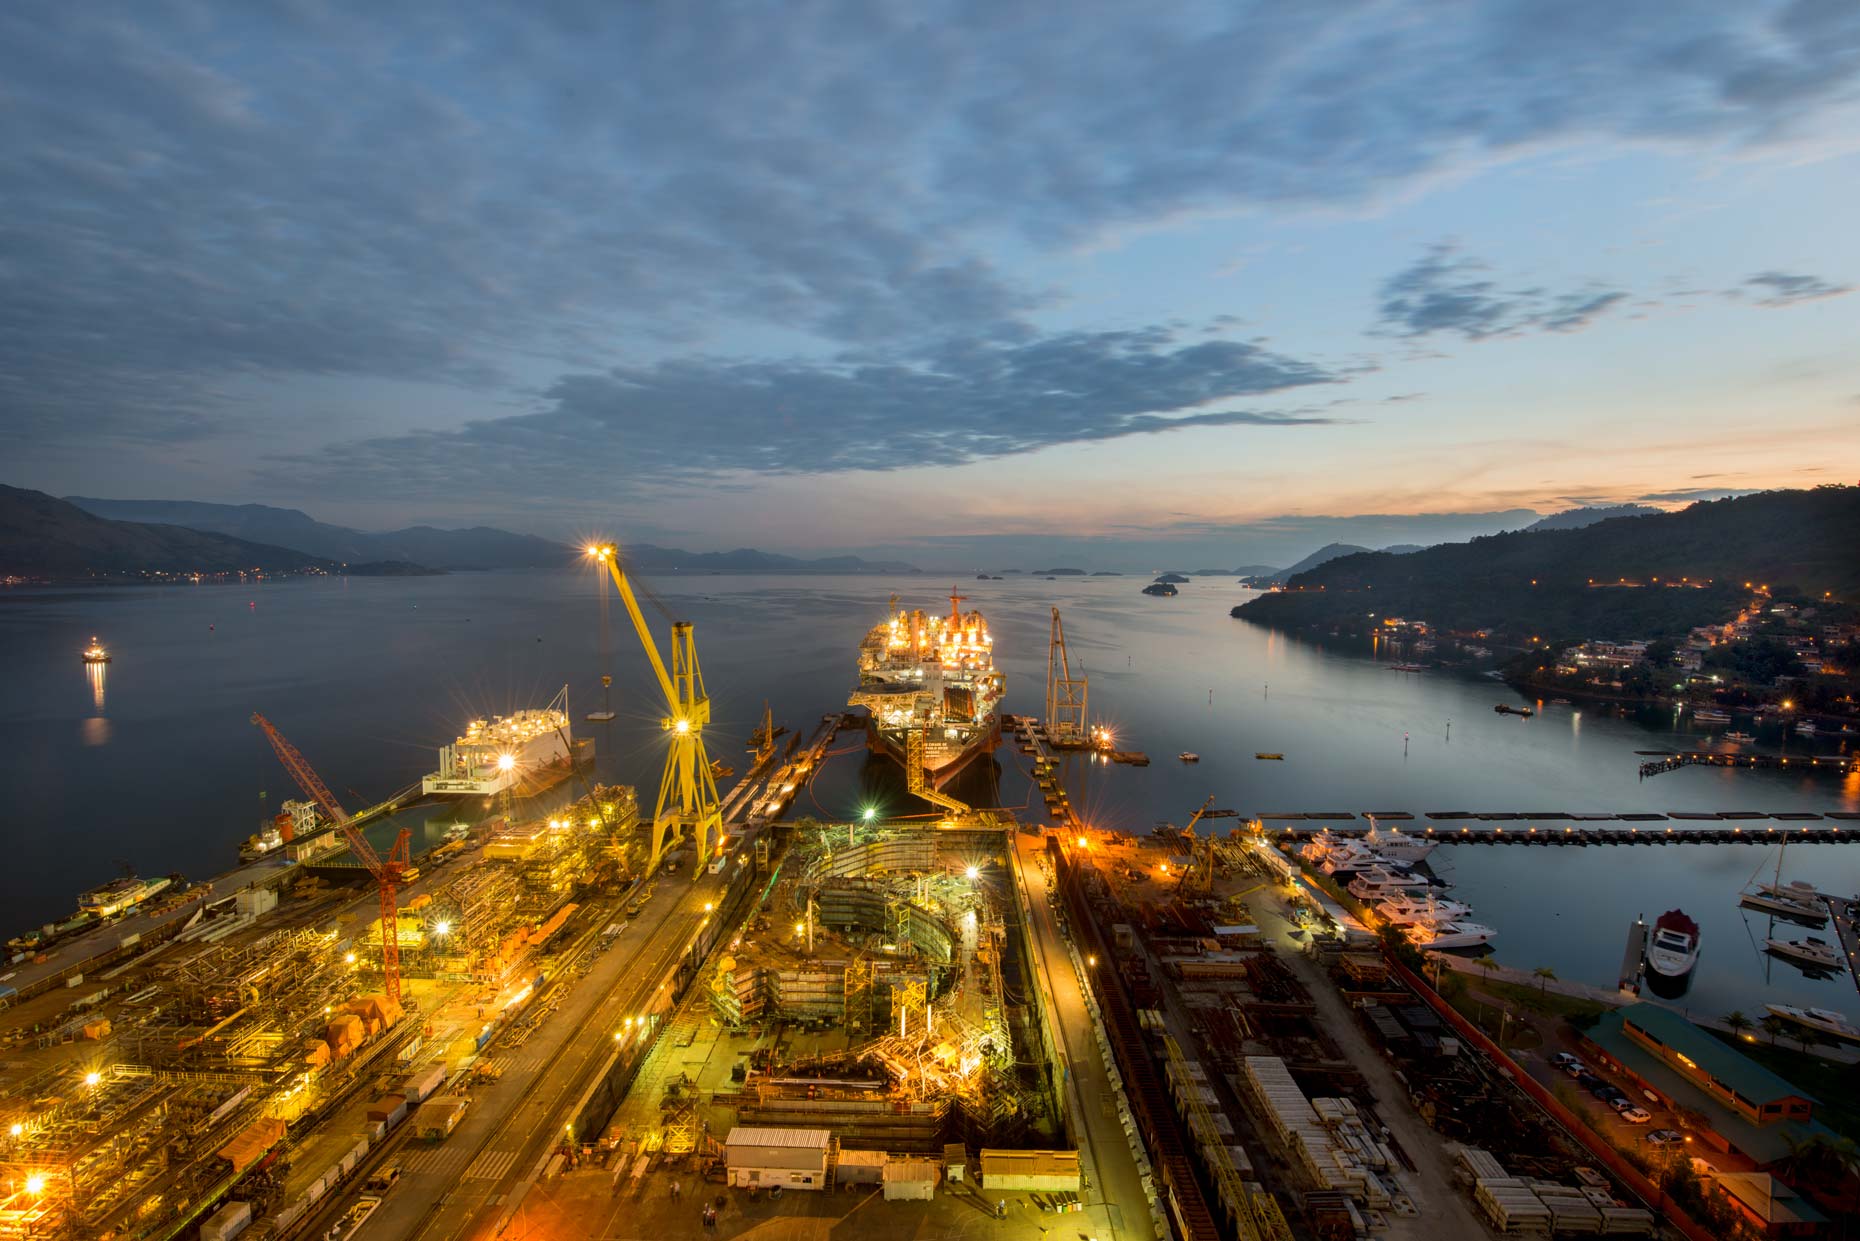 Keppel Brasfel Shipyard Campaign by Photographer Stefen Chow | Keppel Corporation Limited | Shipyard | Industrial Photography | Brazil | South America